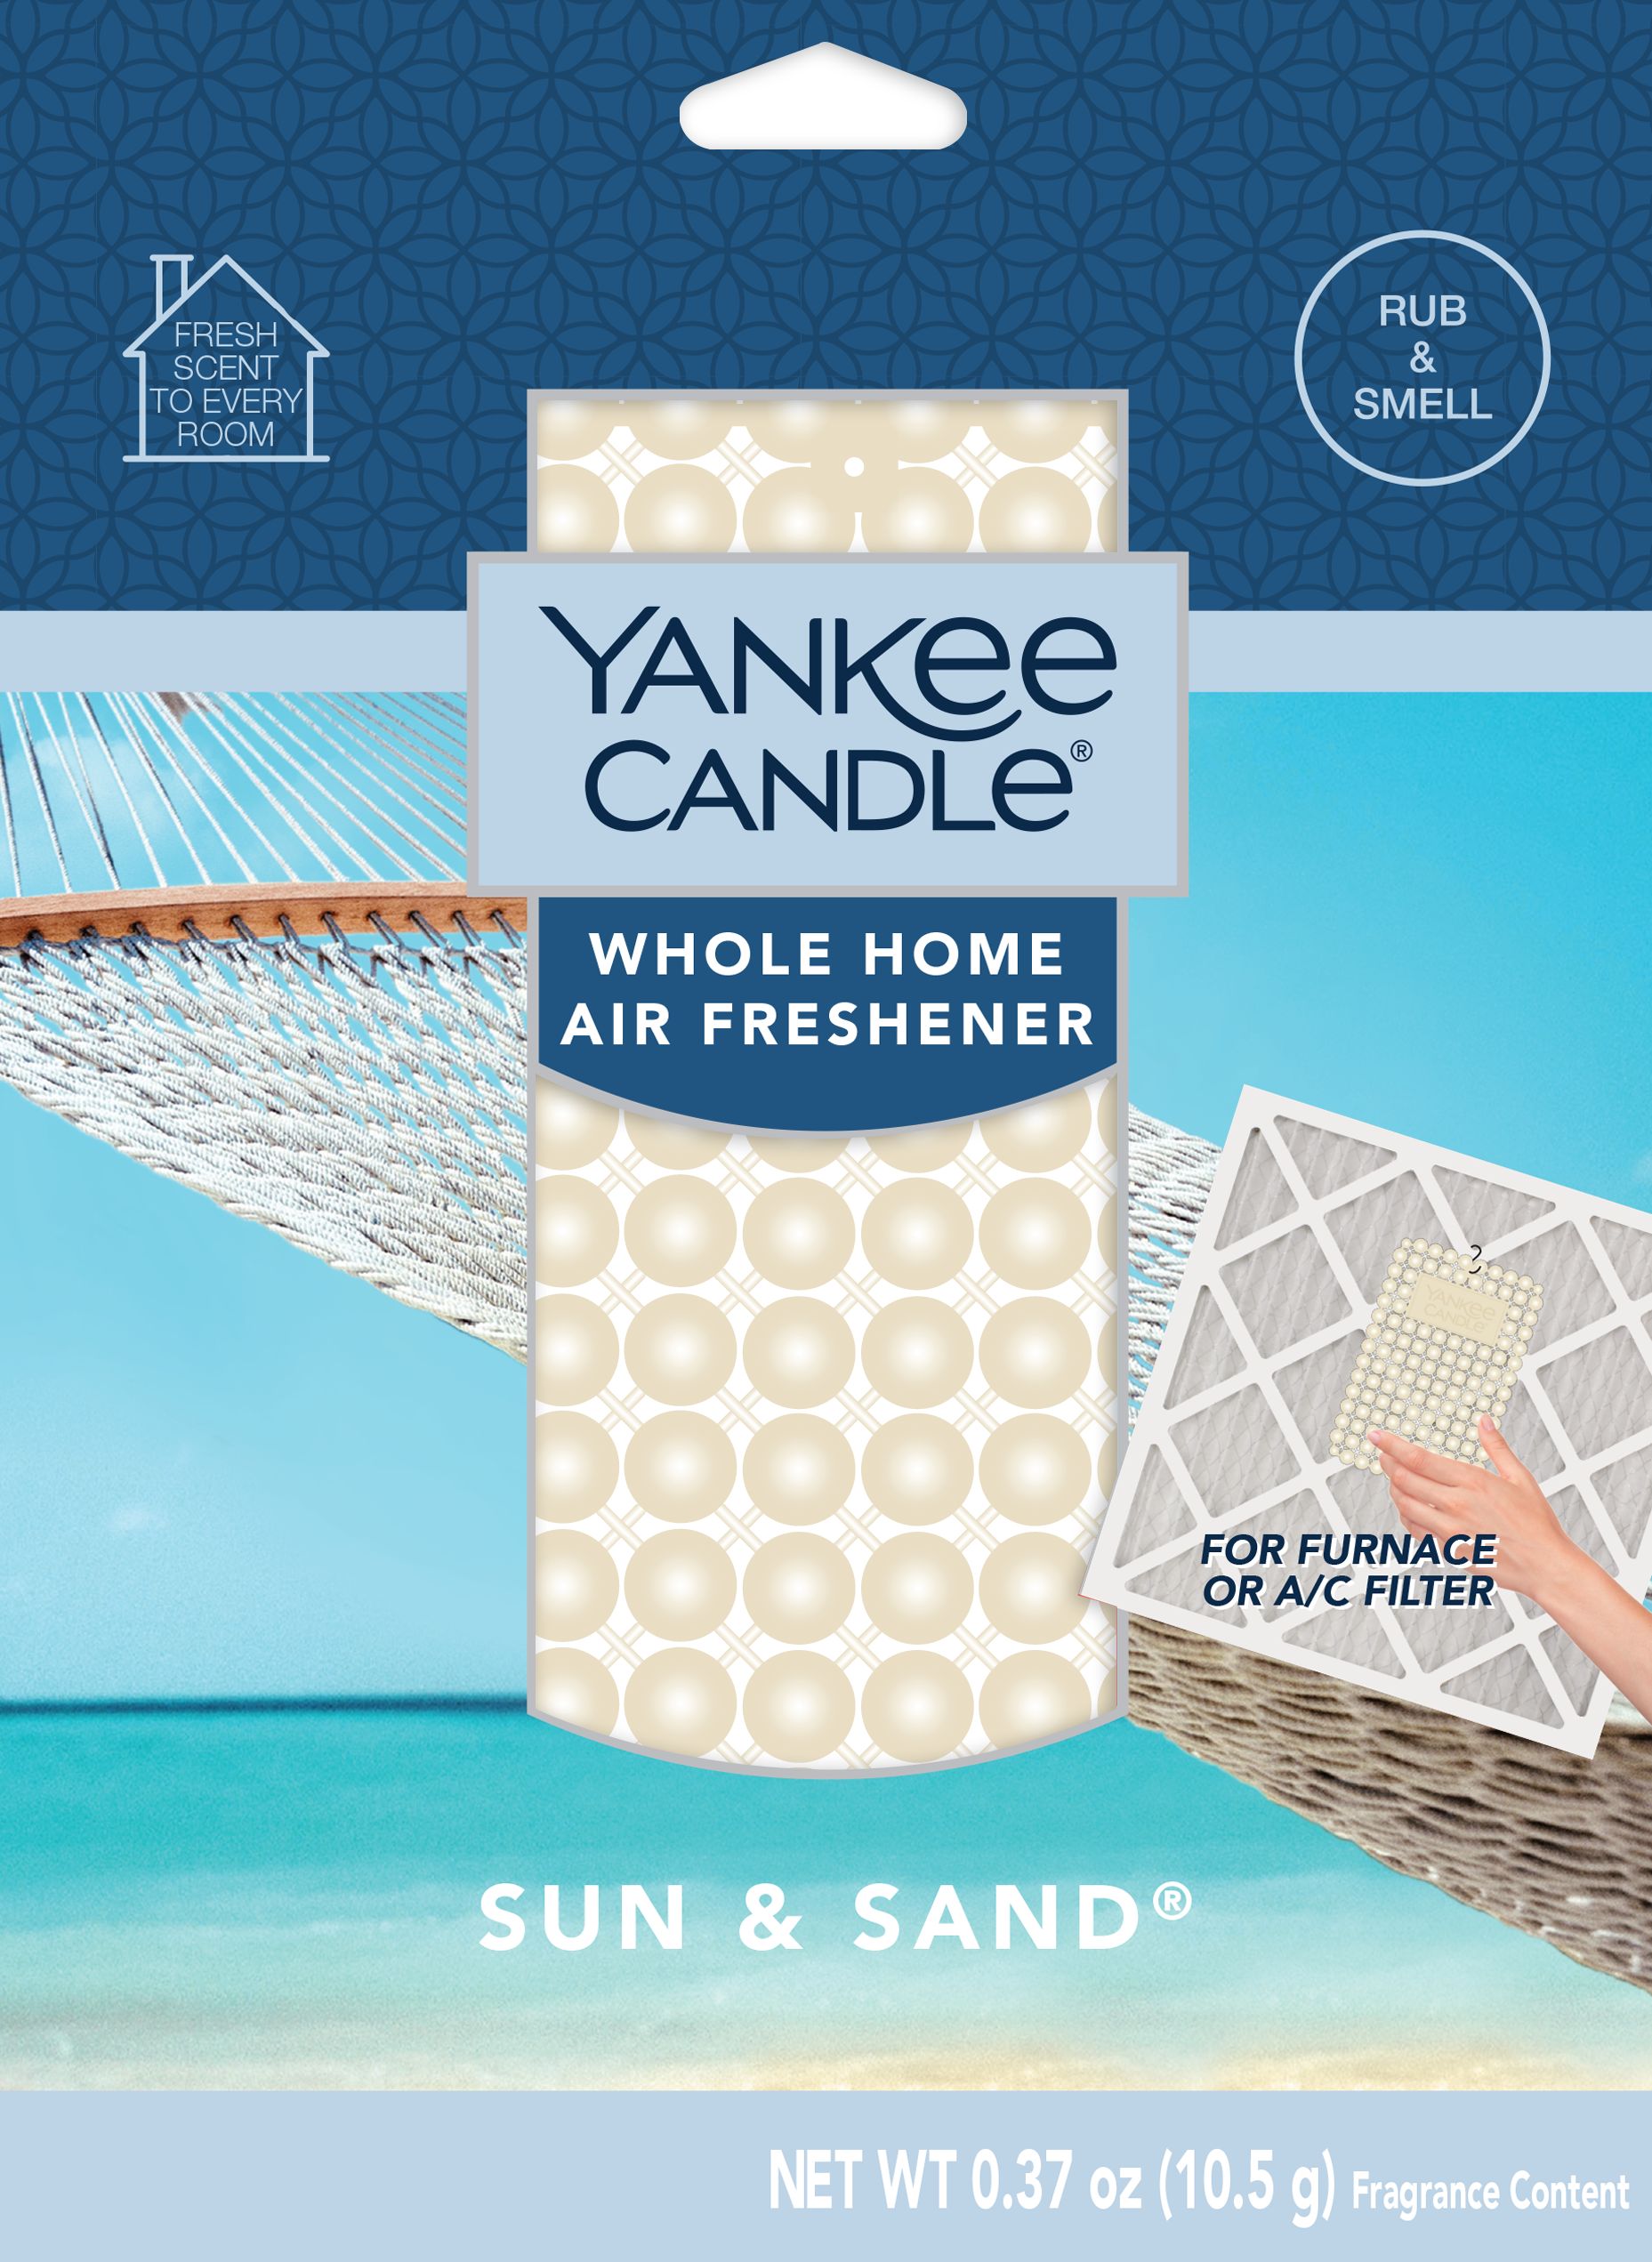 Yankee Candle Whole Home Air Freshener For Furnace A/C Filter - Catching  Rays